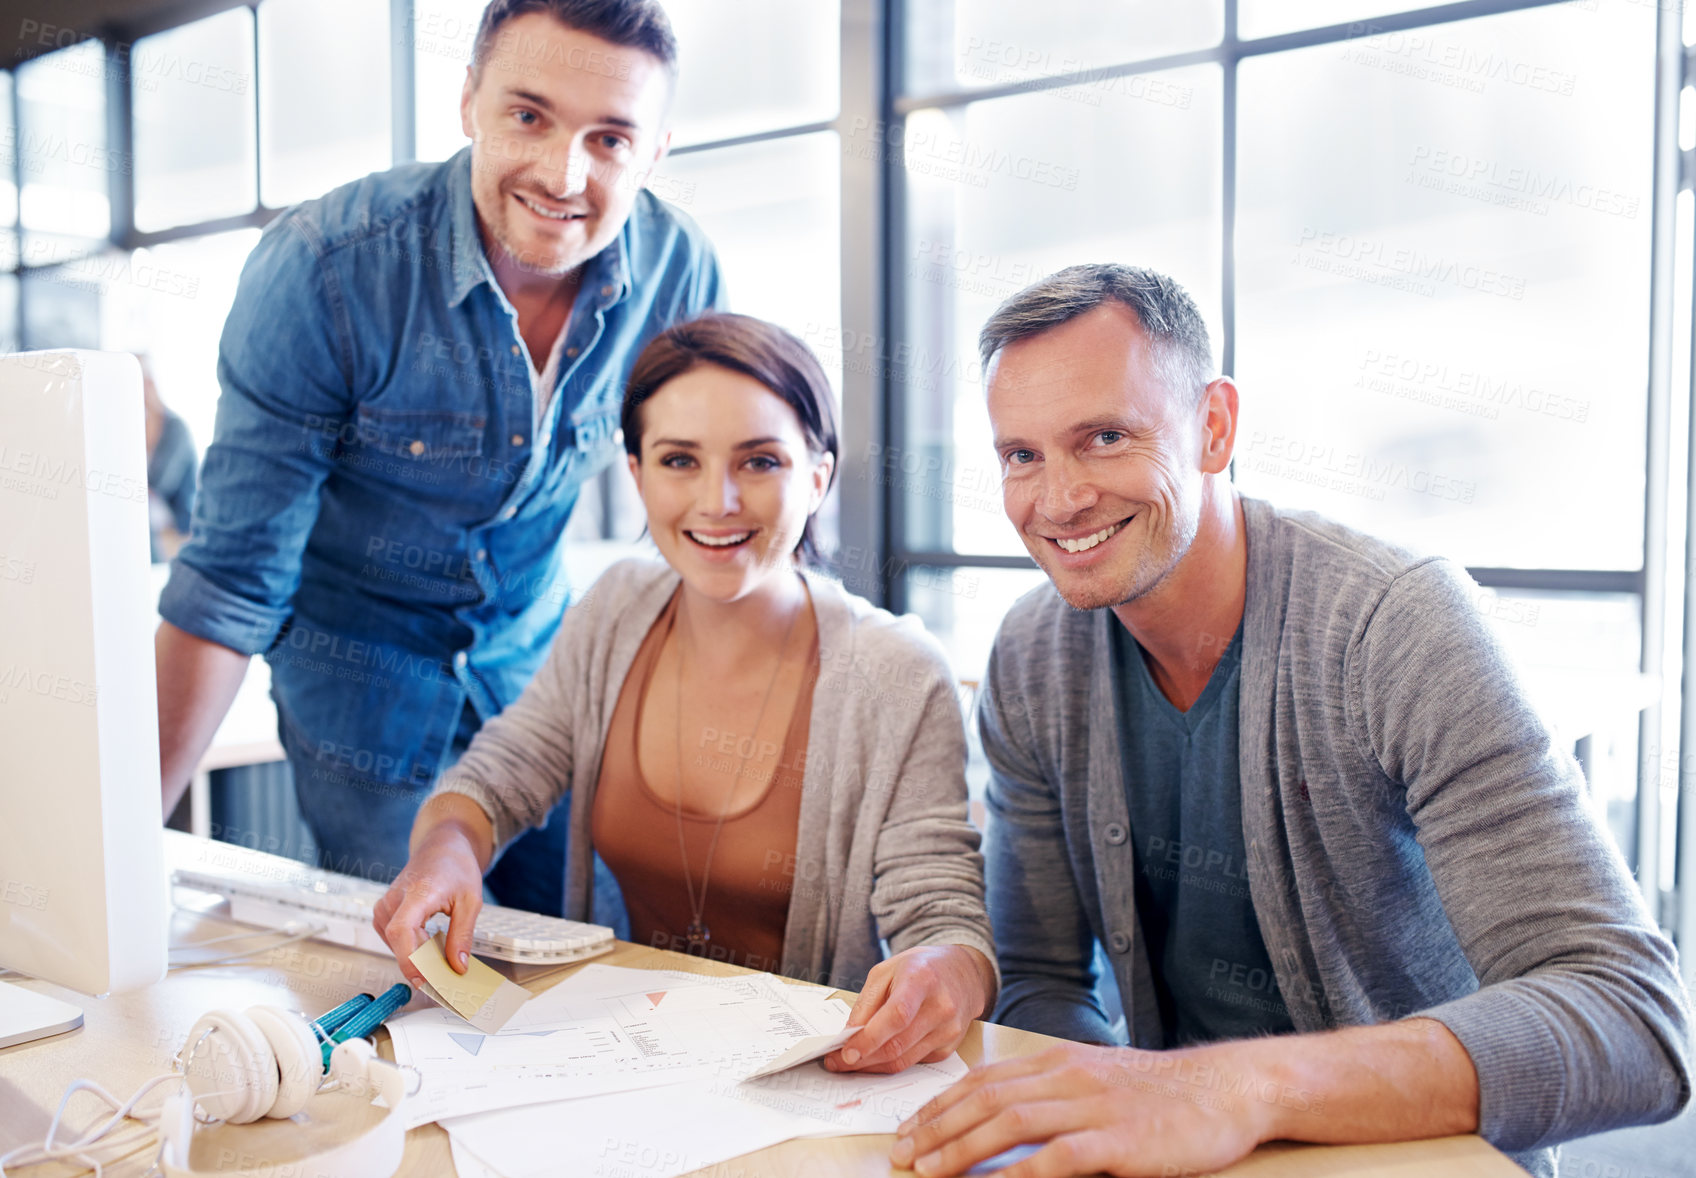 Buy stock photo Shot of three coworkers going through paperwork together